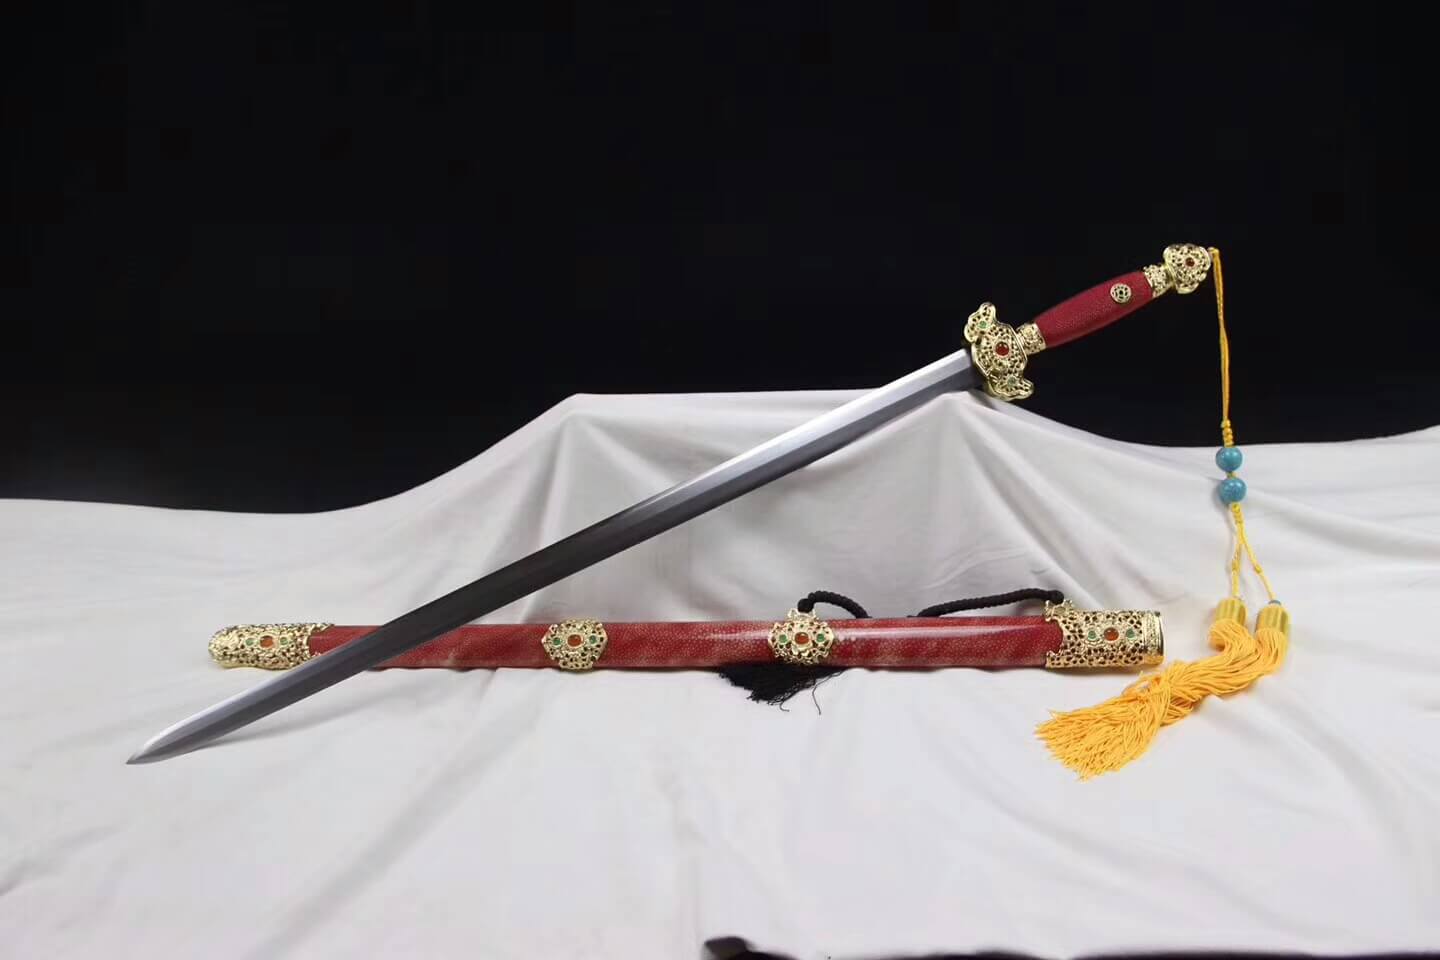 Longquan sword,Folded steel,Red skin scabbard,Brass fitting,Full tang - Chinese sword shop